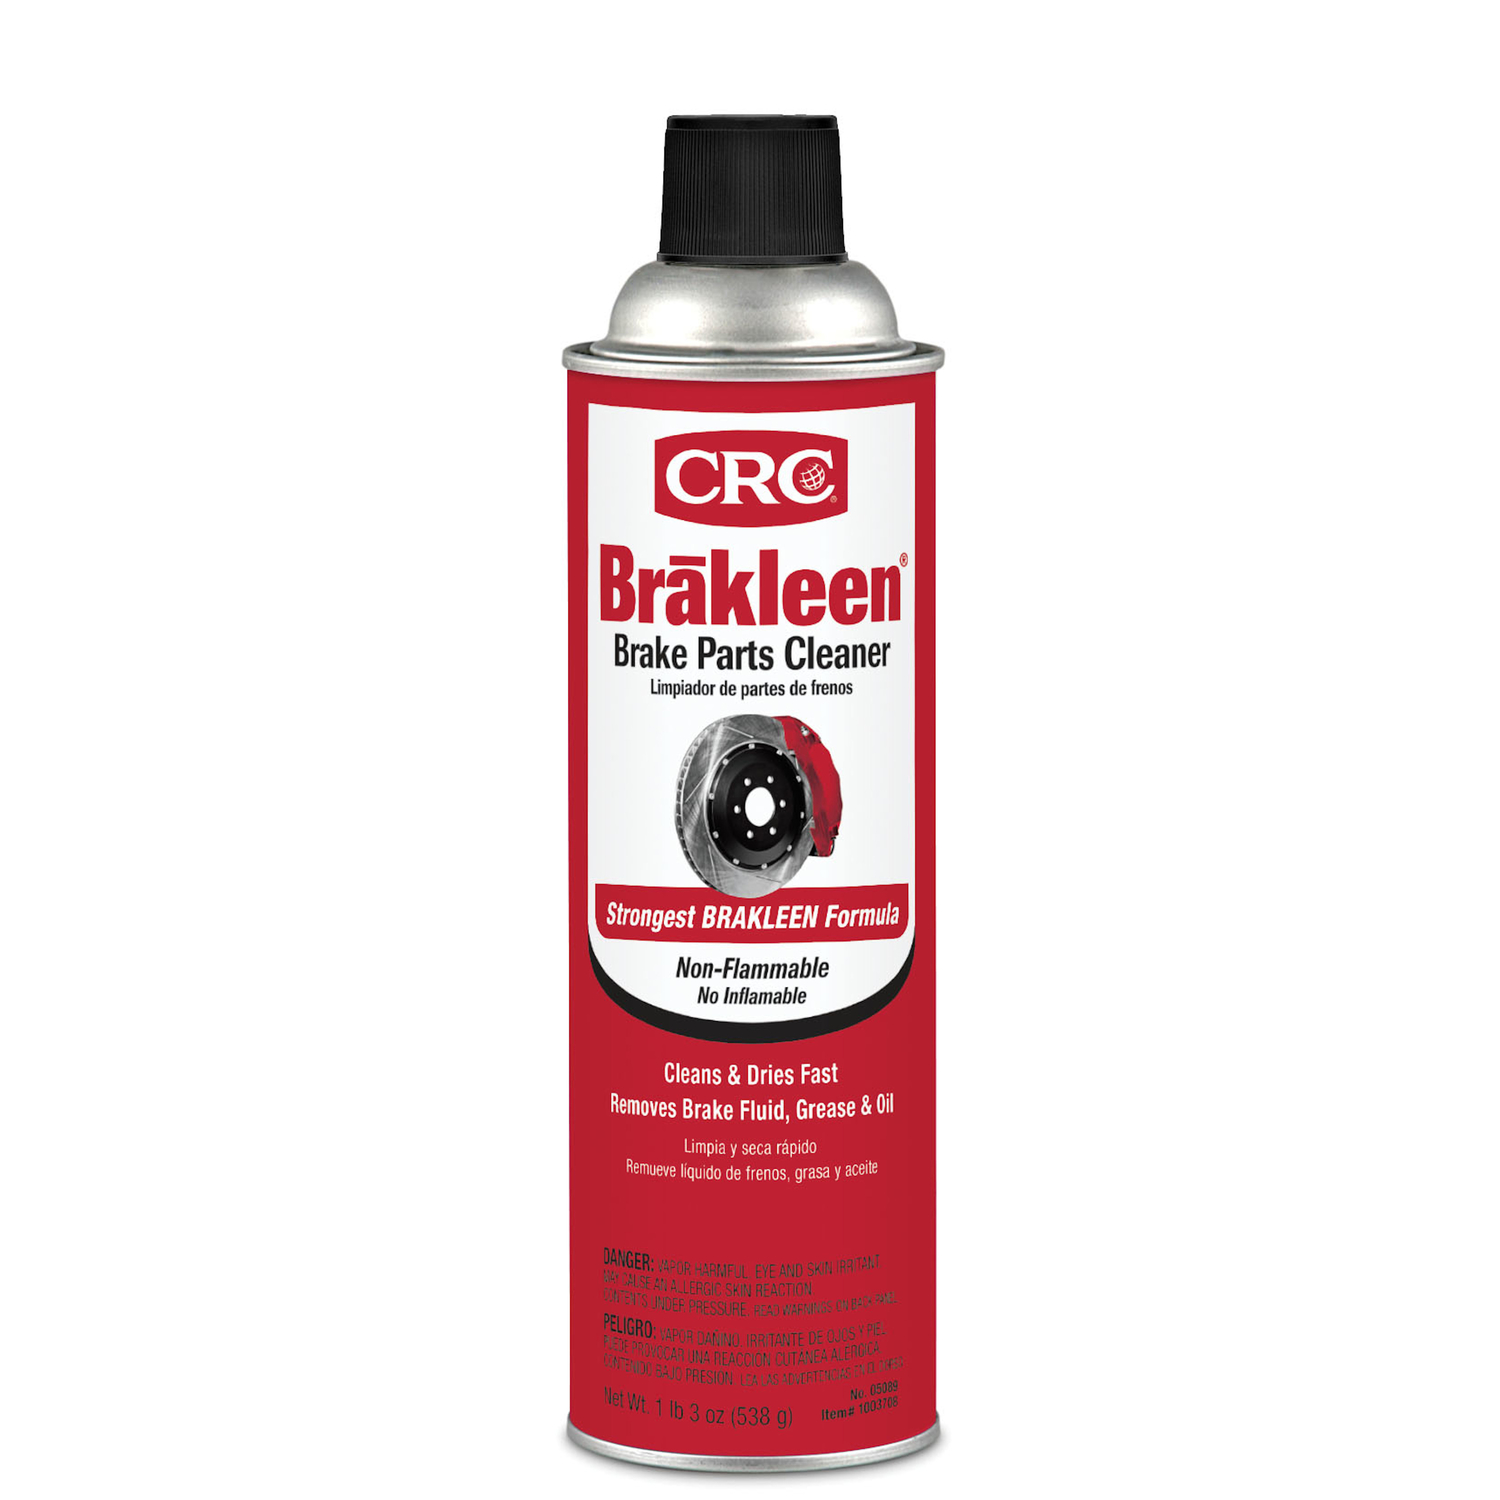 CRC Brakleen Chlorinated Nonflammable Brake Parts Cleaner 19 oz